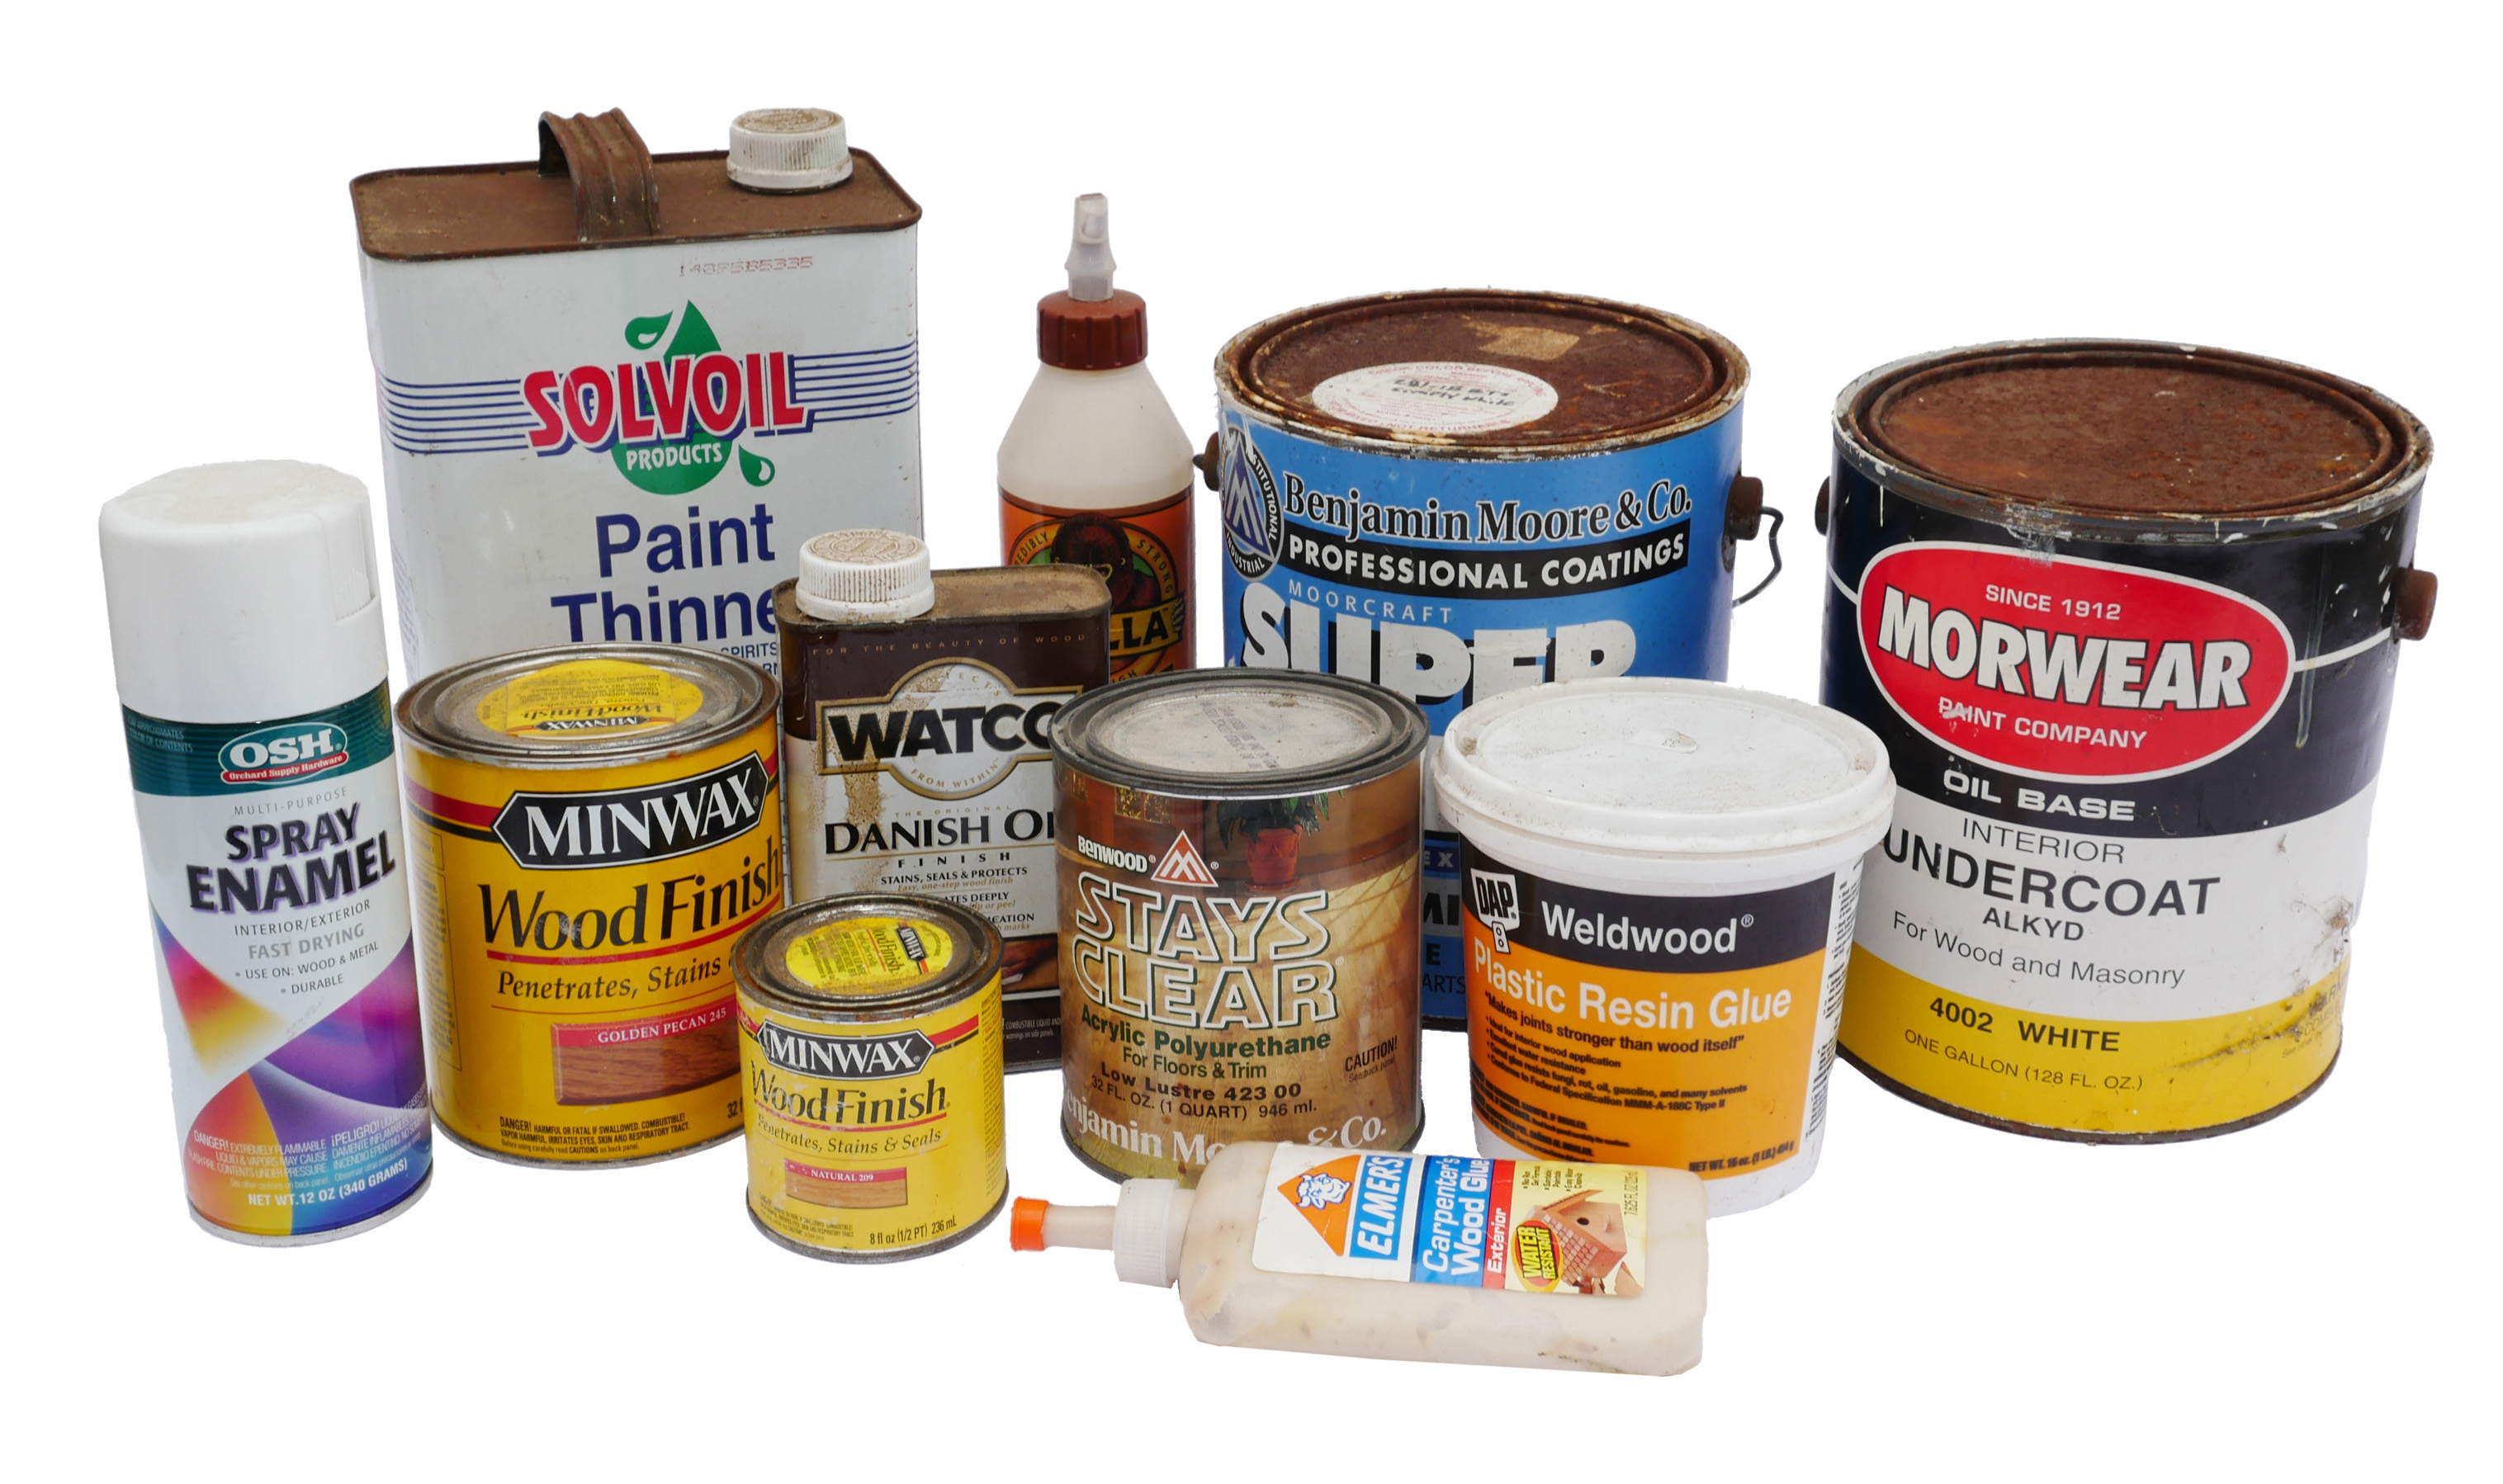 How to Recycle & Dispose of Paint Thinner